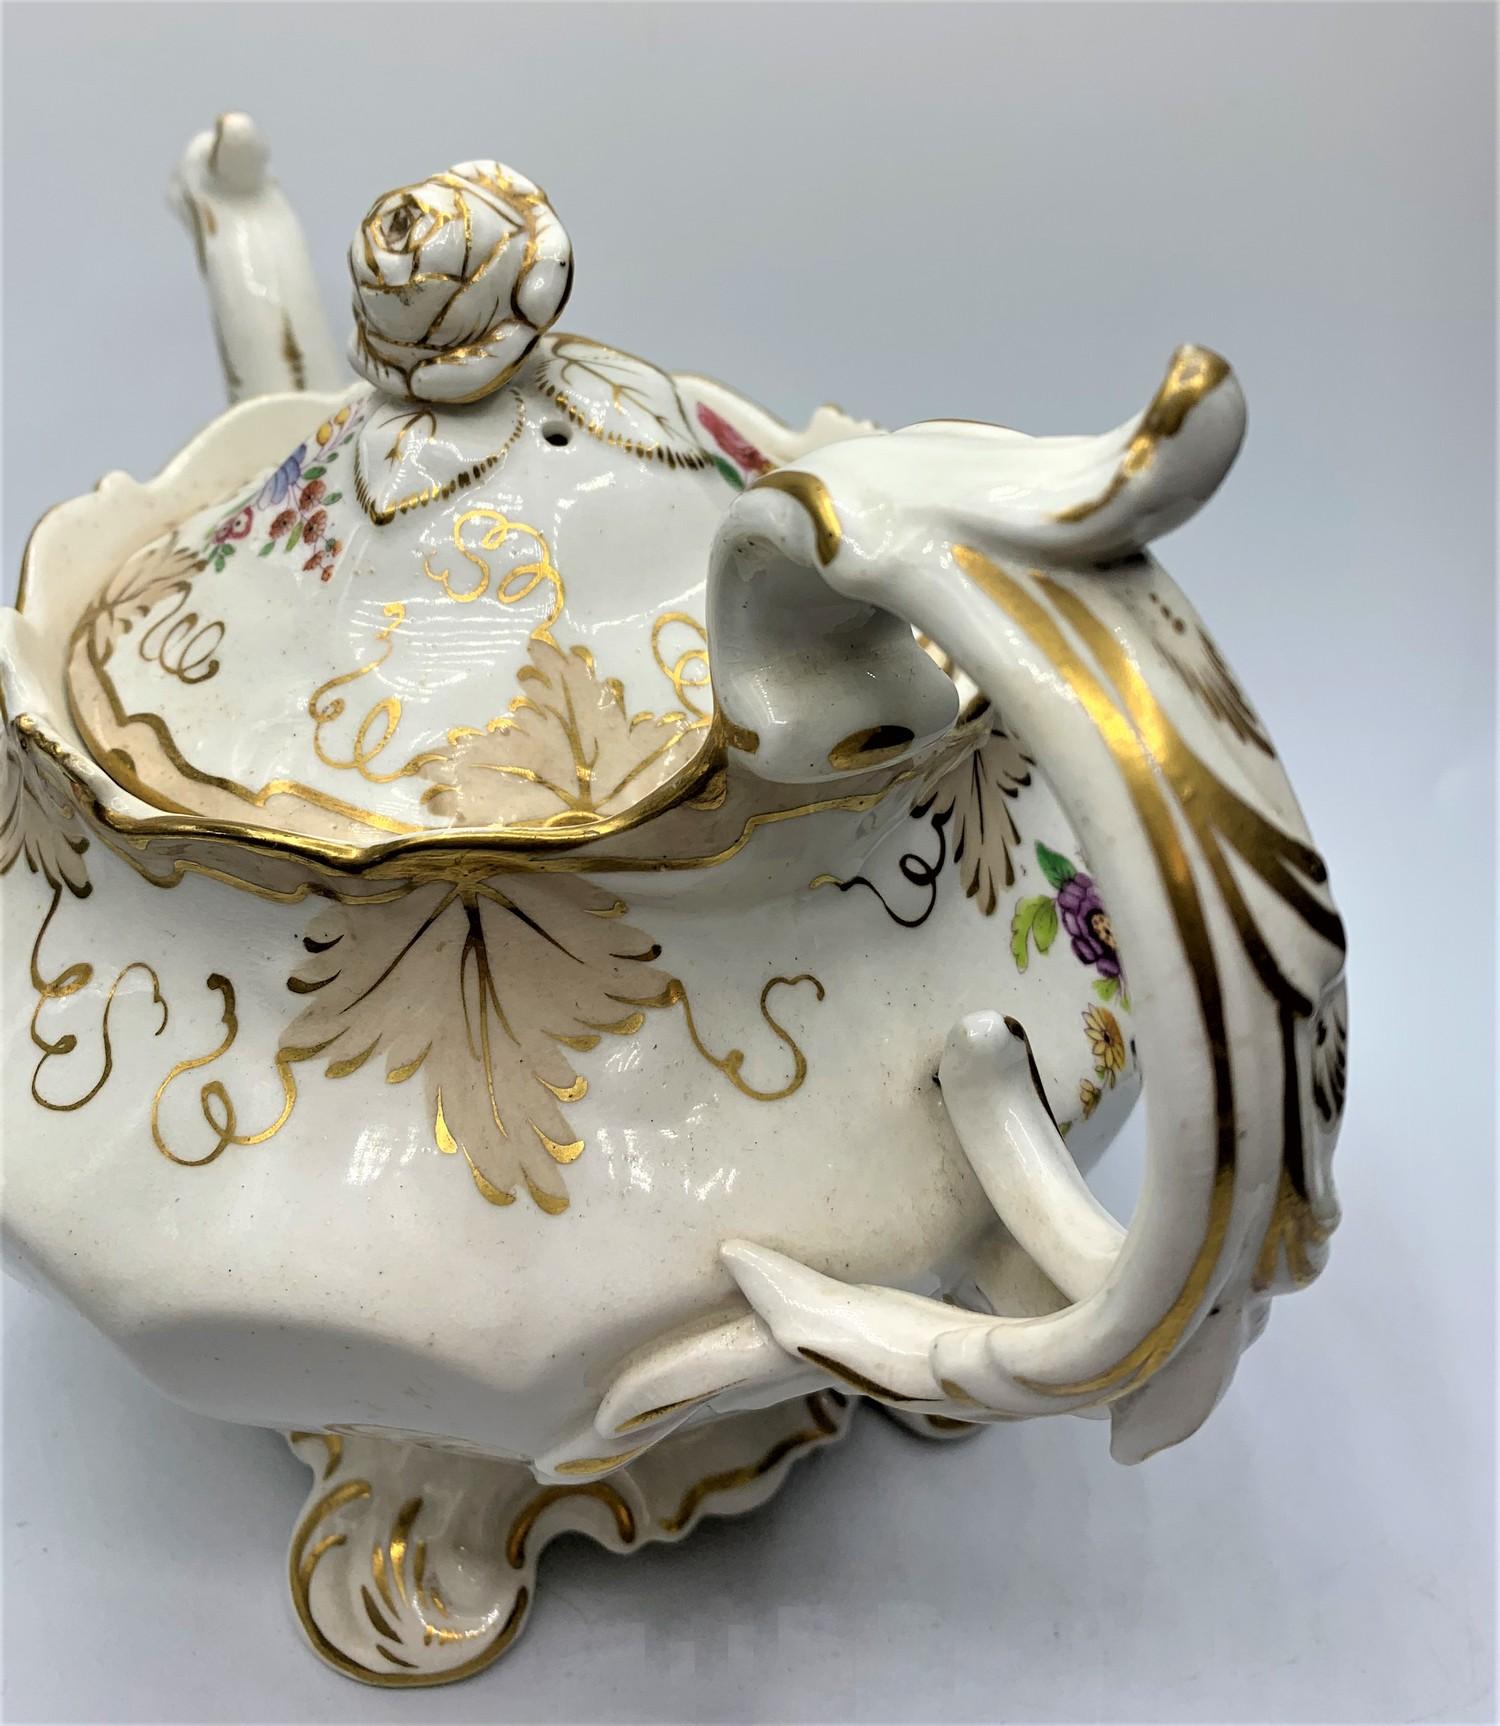 H&R Daniel Bath shape Teapot with Floral theme in good condition - Image 8 of 8